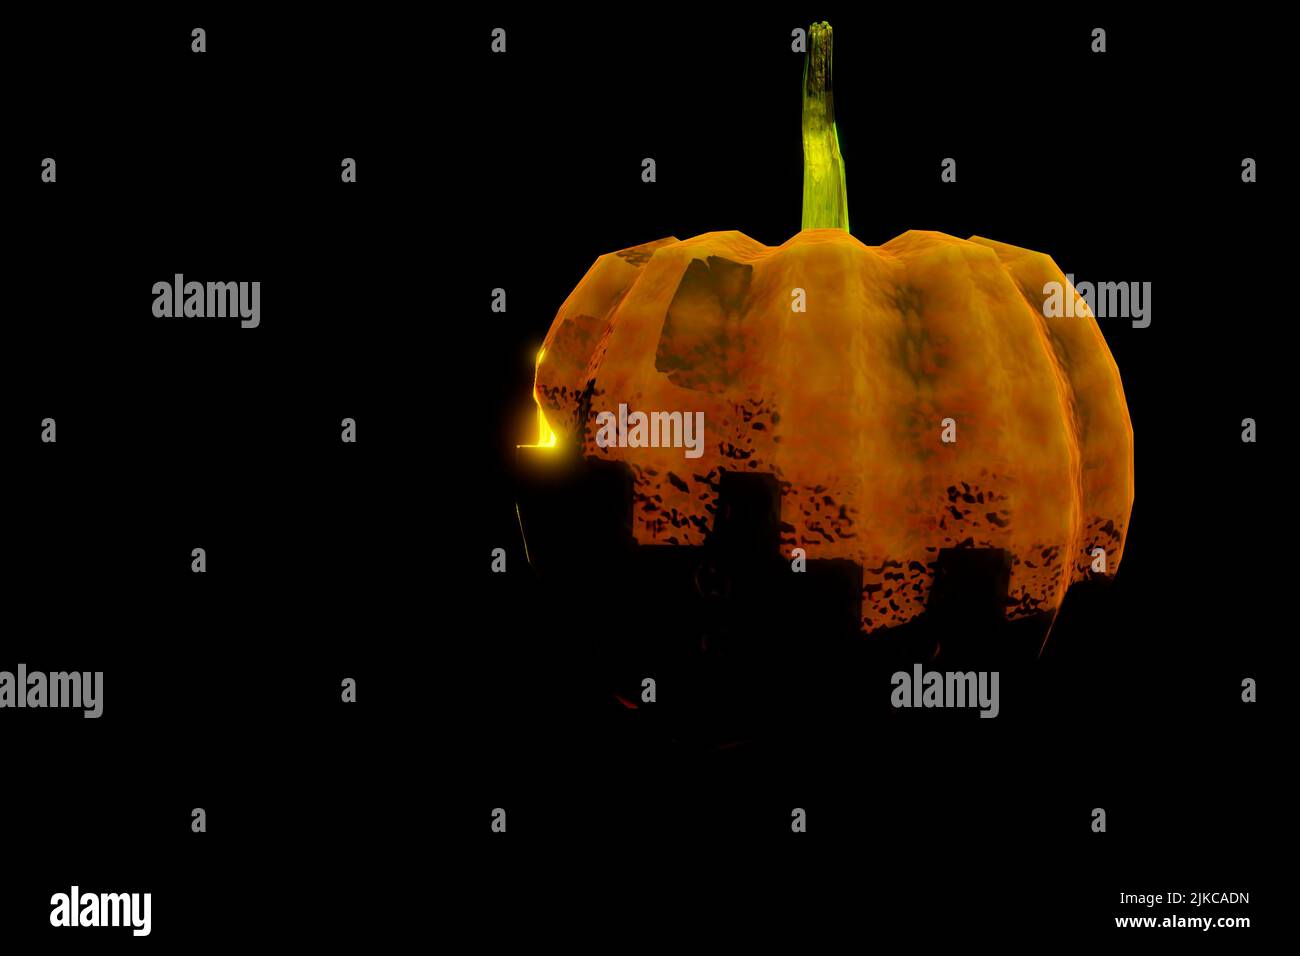 Pumpkin emerging from the darkness while in profile a bright yellow light stands out glowing in the dark on halloween night Stock Photo